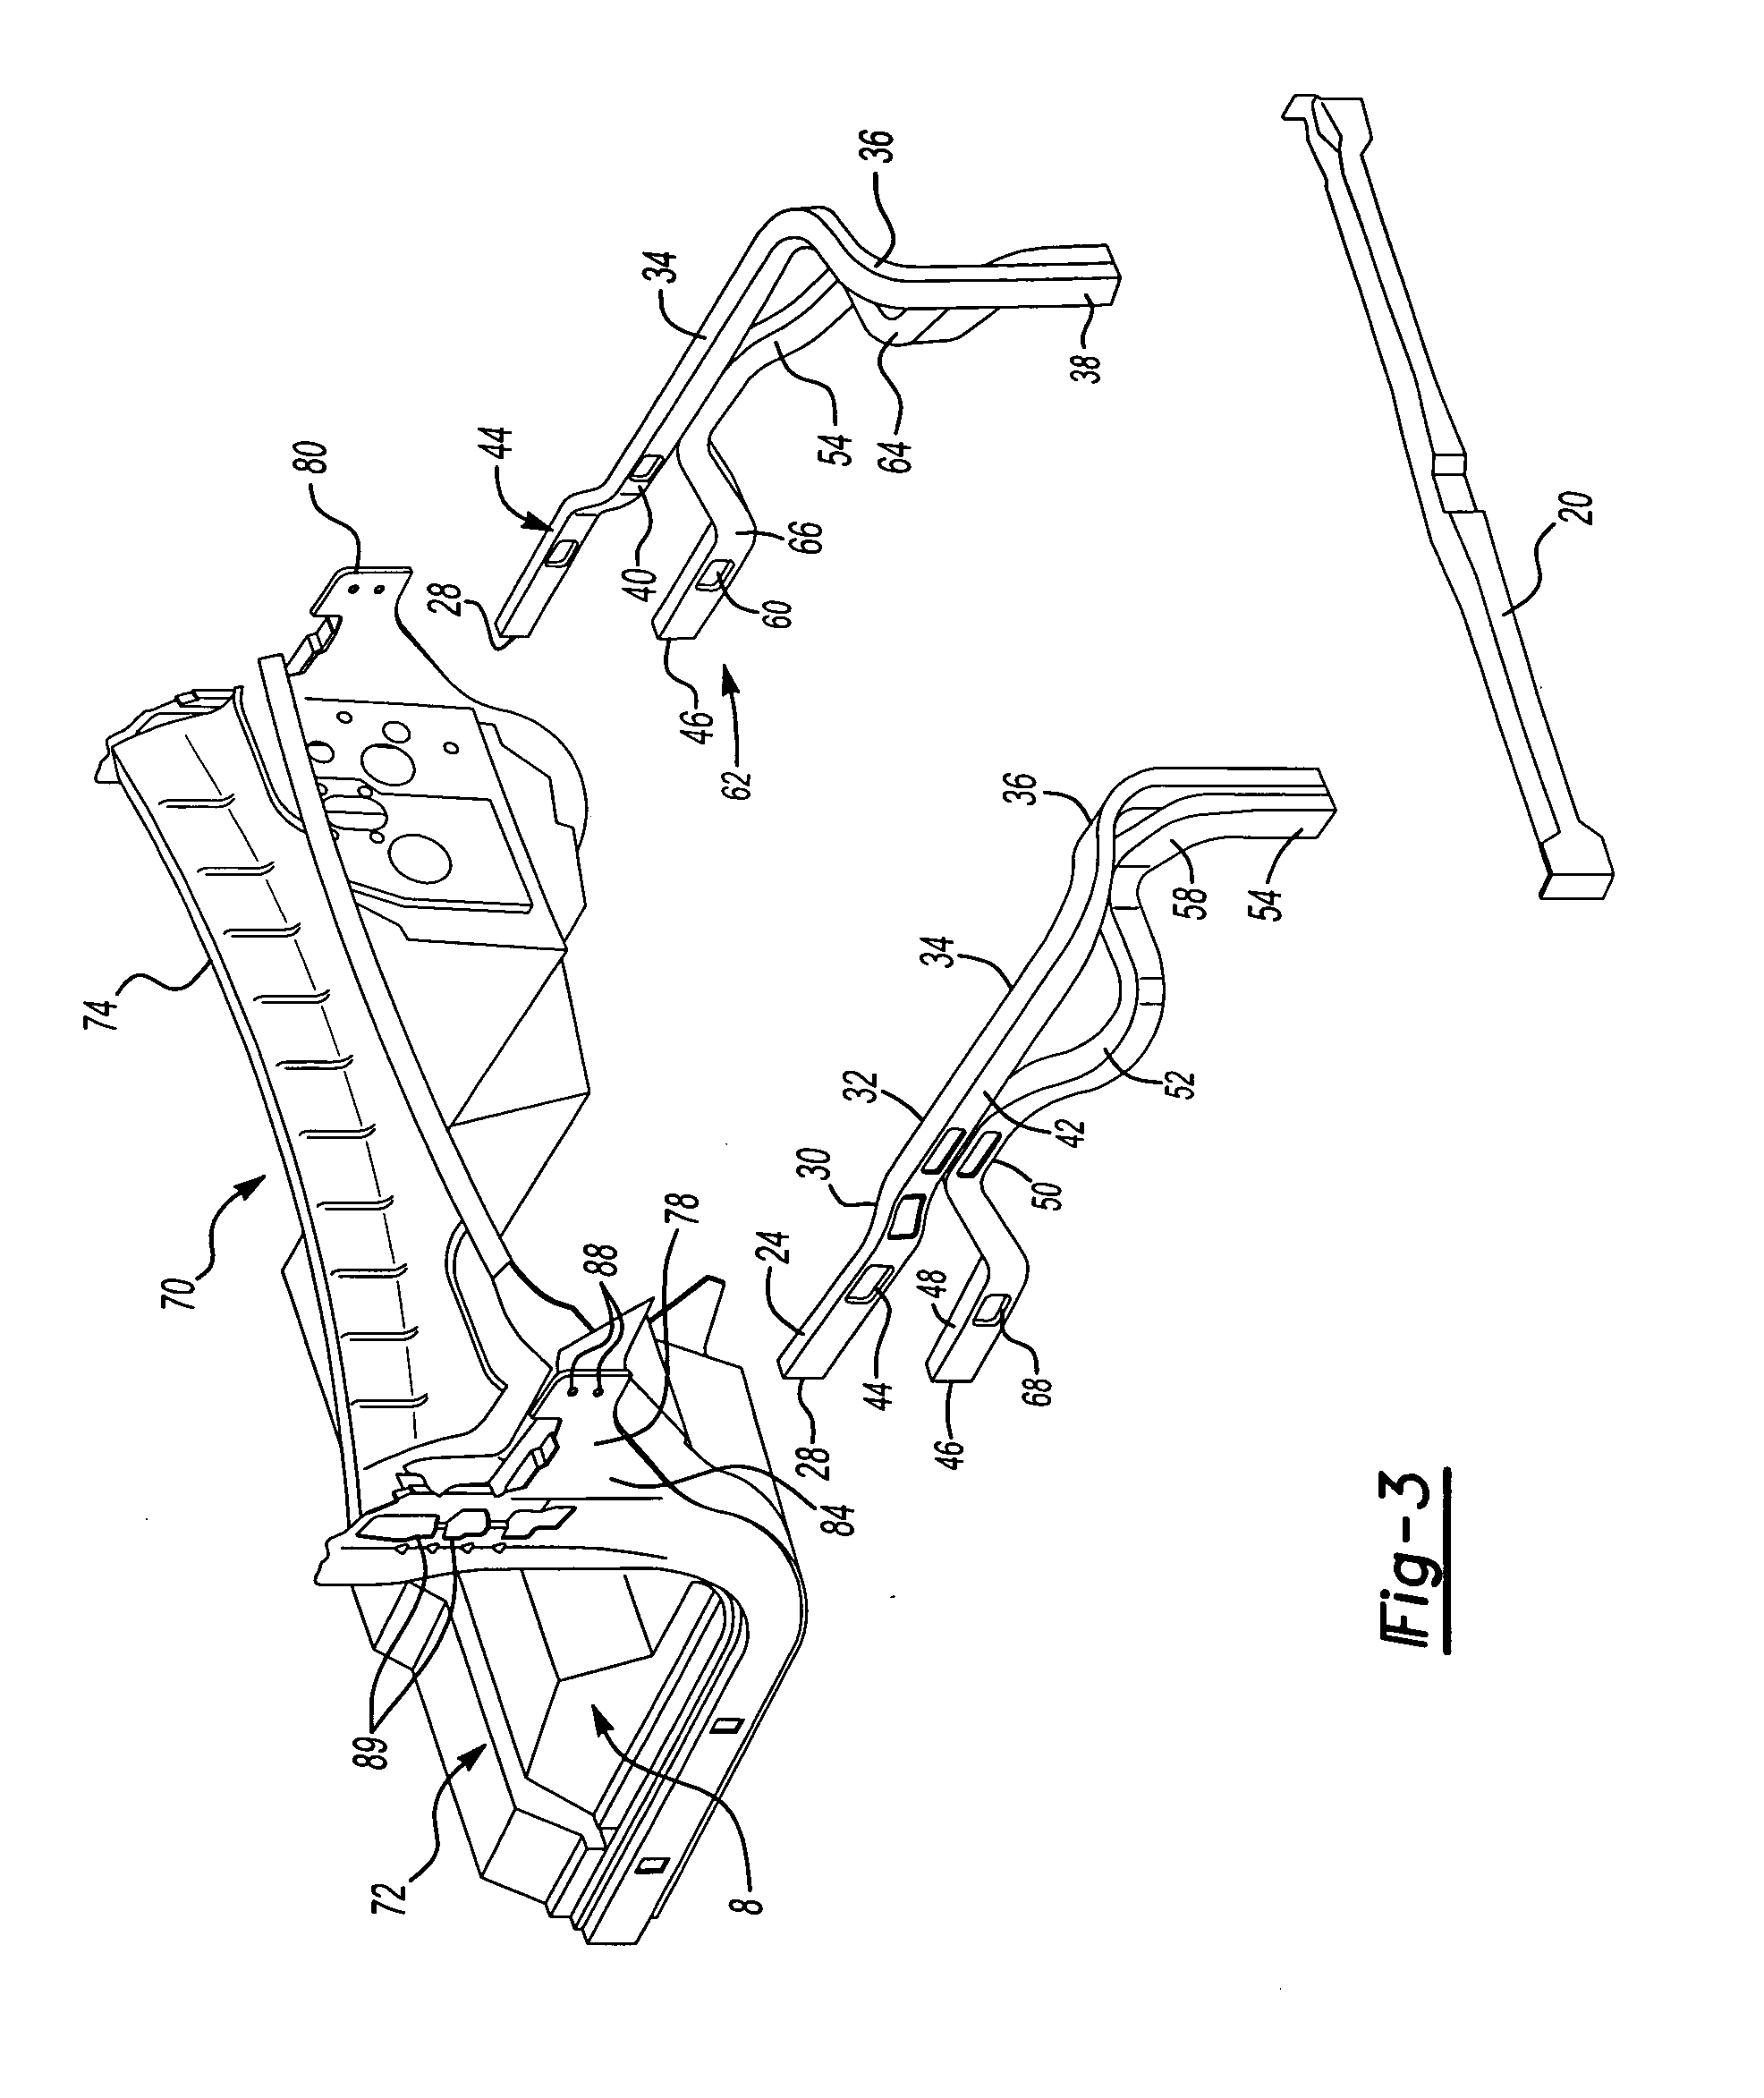 Single set geometry method for assembly of a vehicle